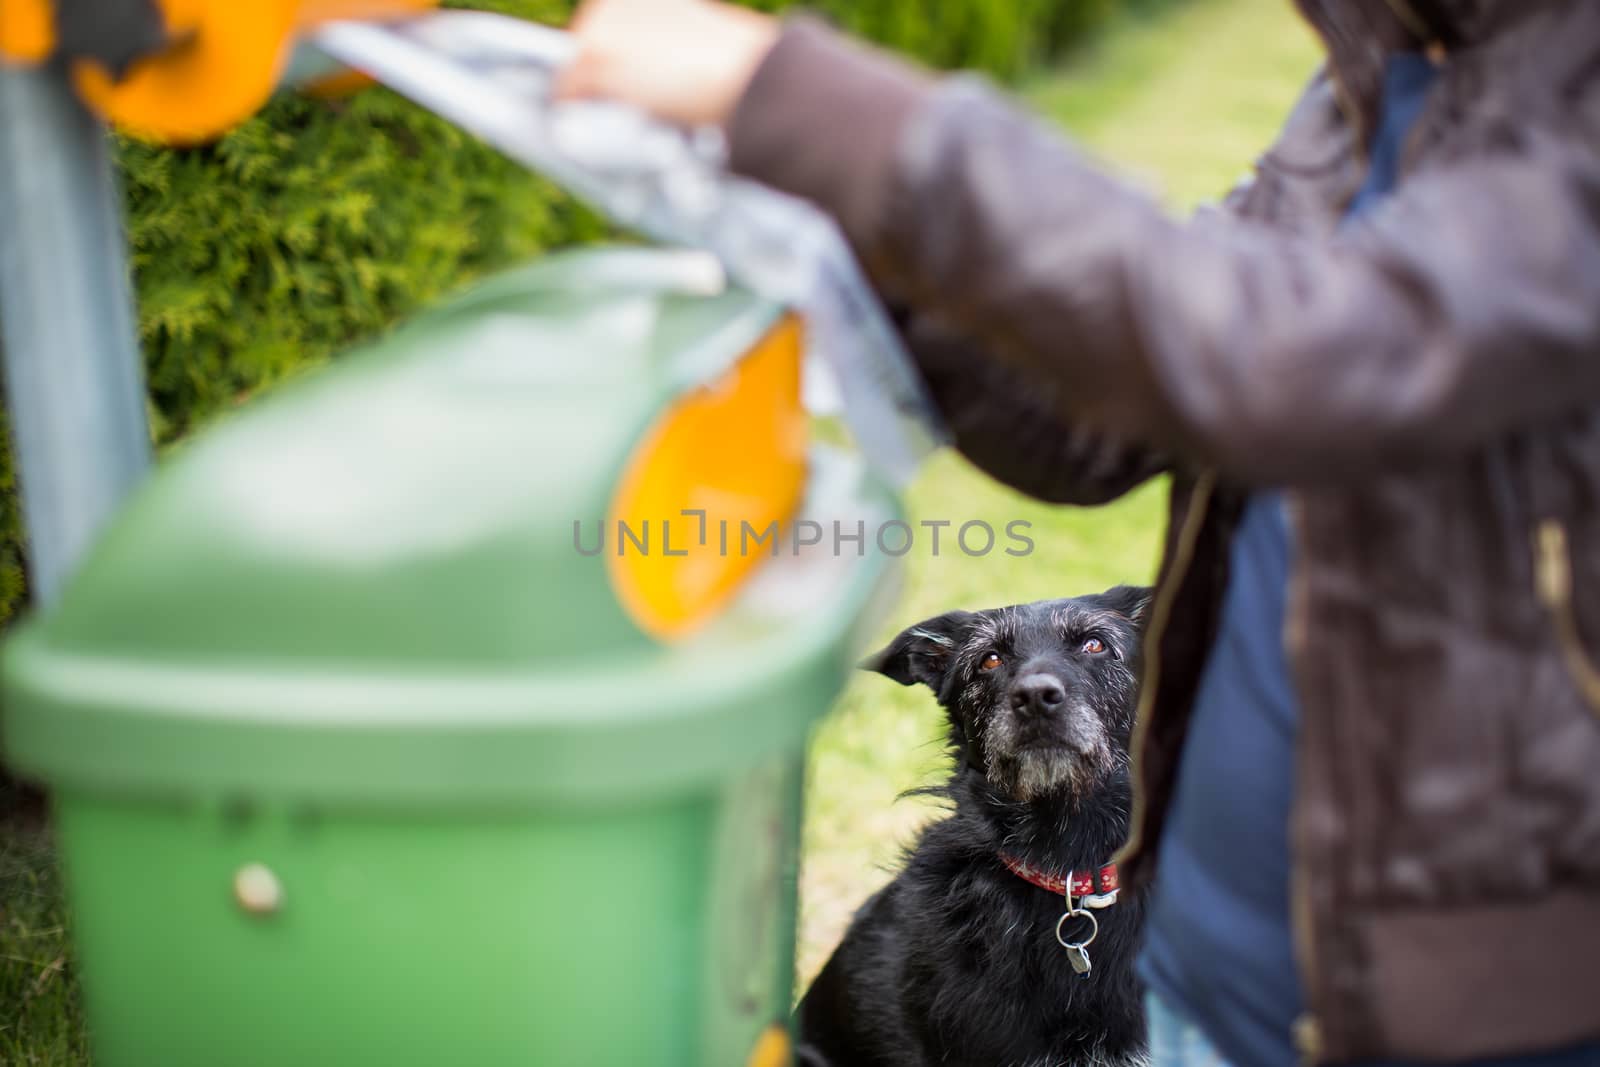 Do not let your dog foul! - Young woman grabbing a plastic bag in a park to tidy up after her dog later